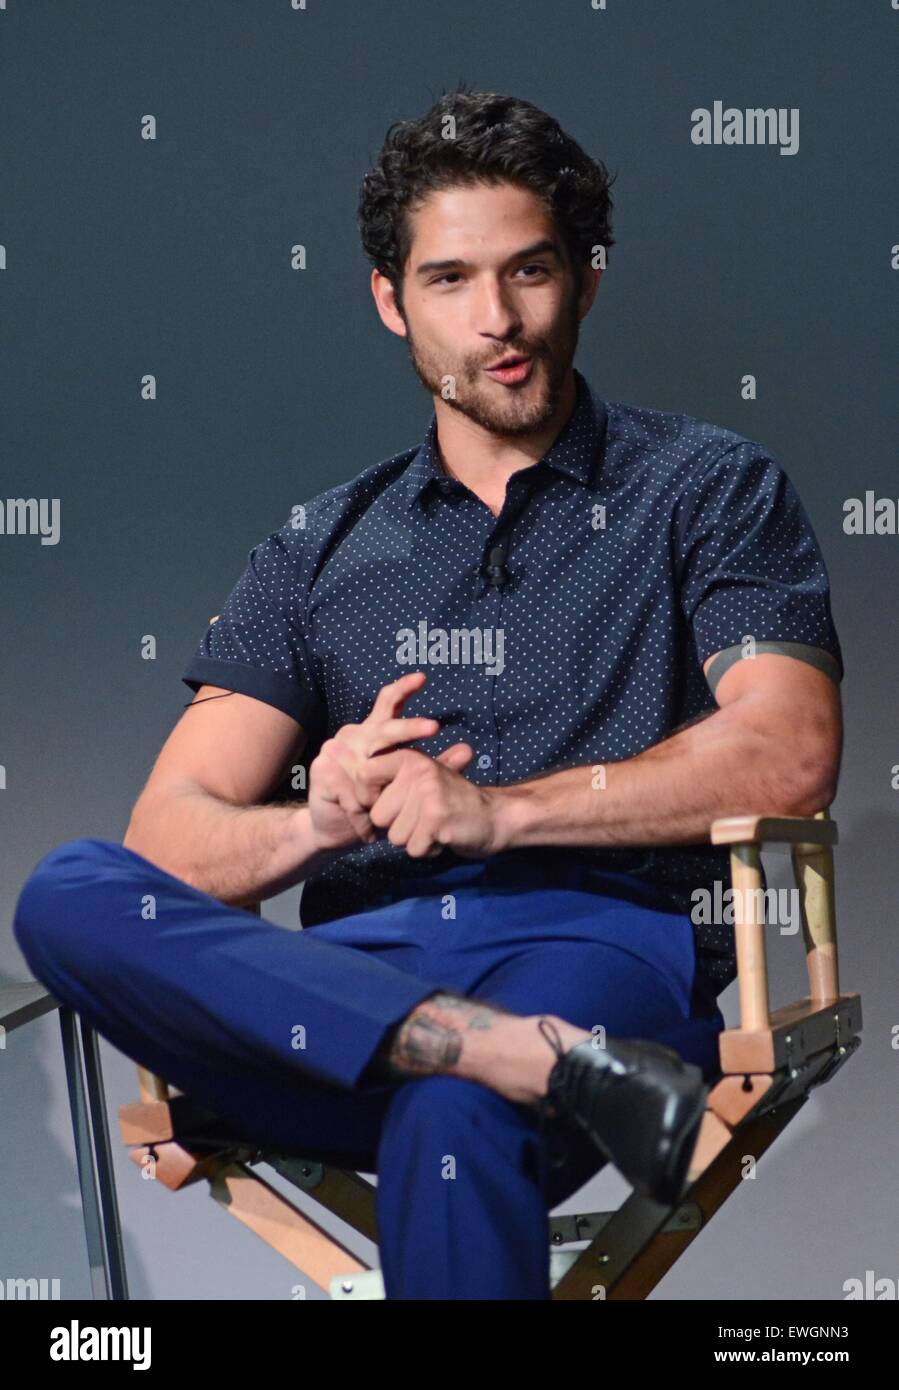 Posey where is from tyler Tyler Posey